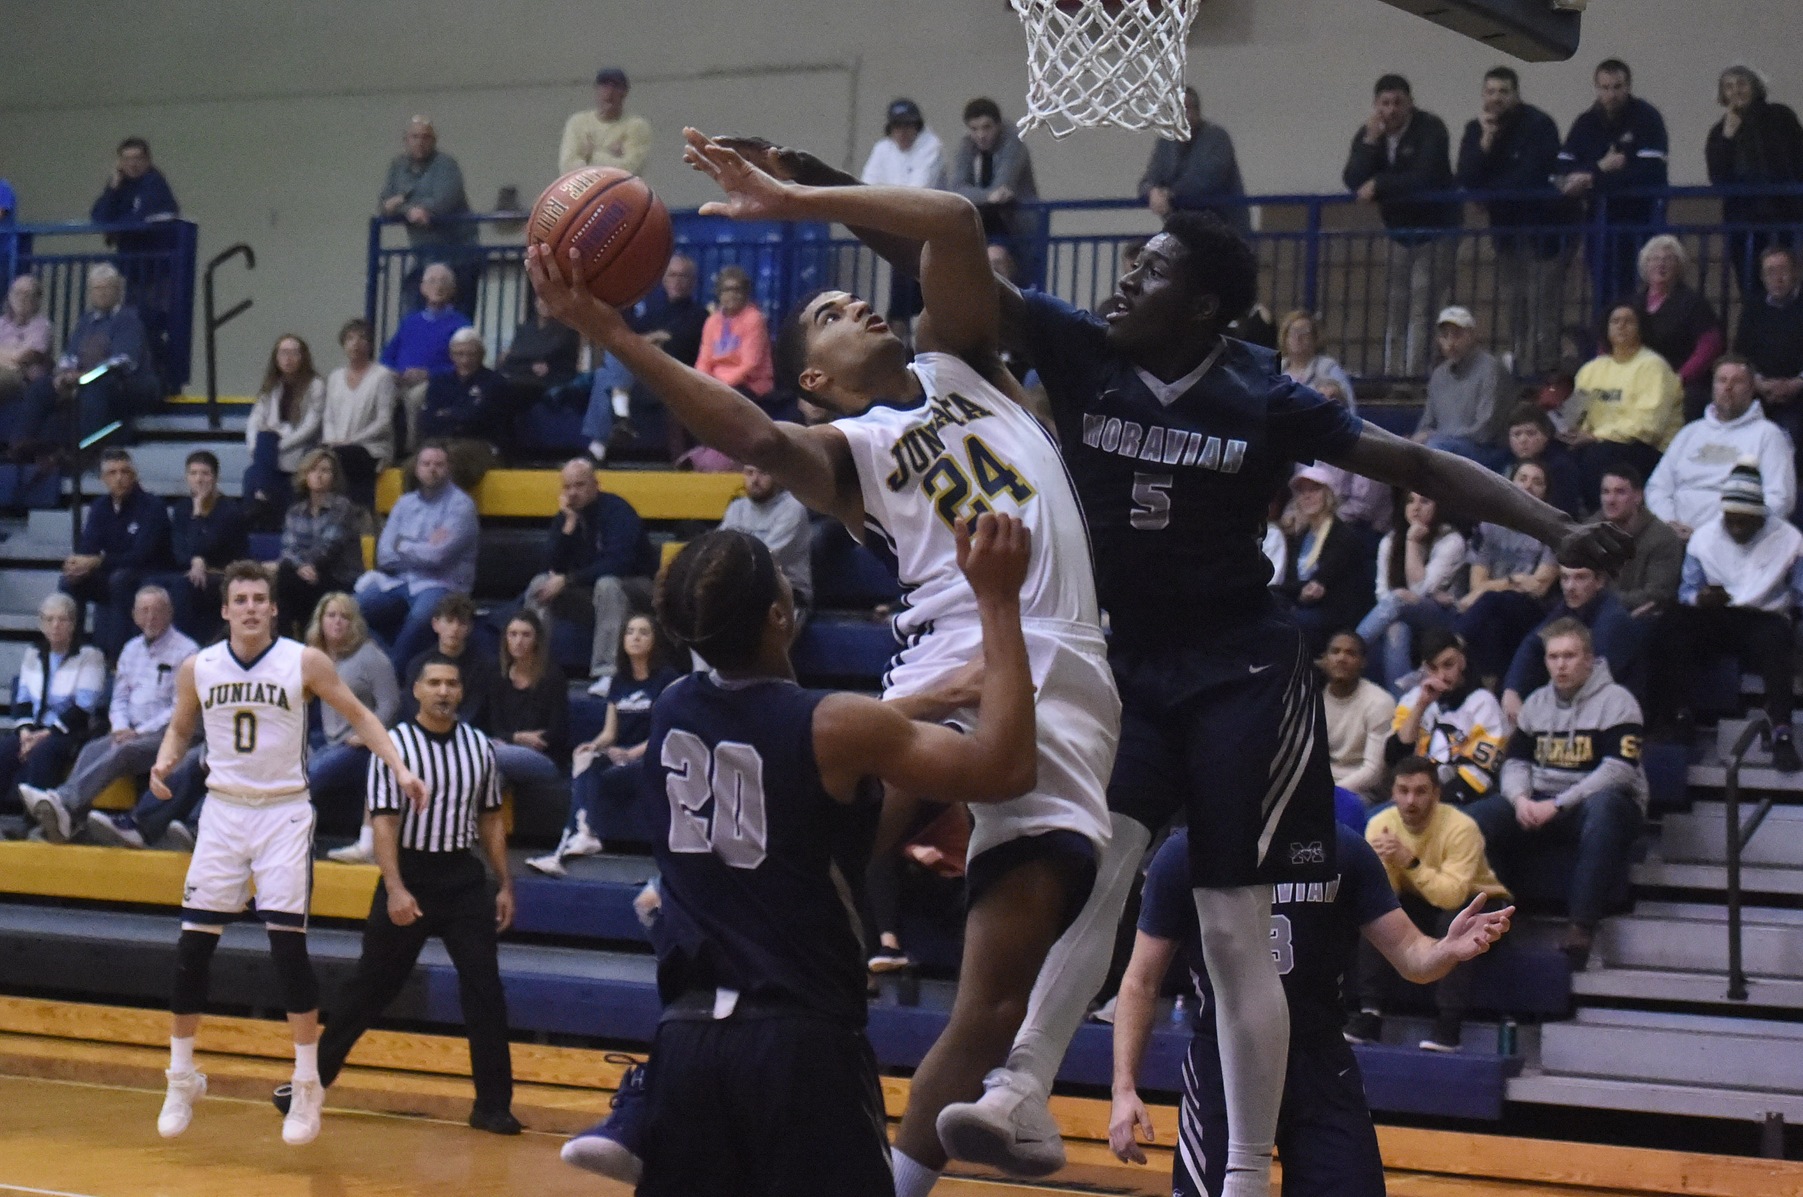 Marcus Lee scores two of his 17 points against Moravian.